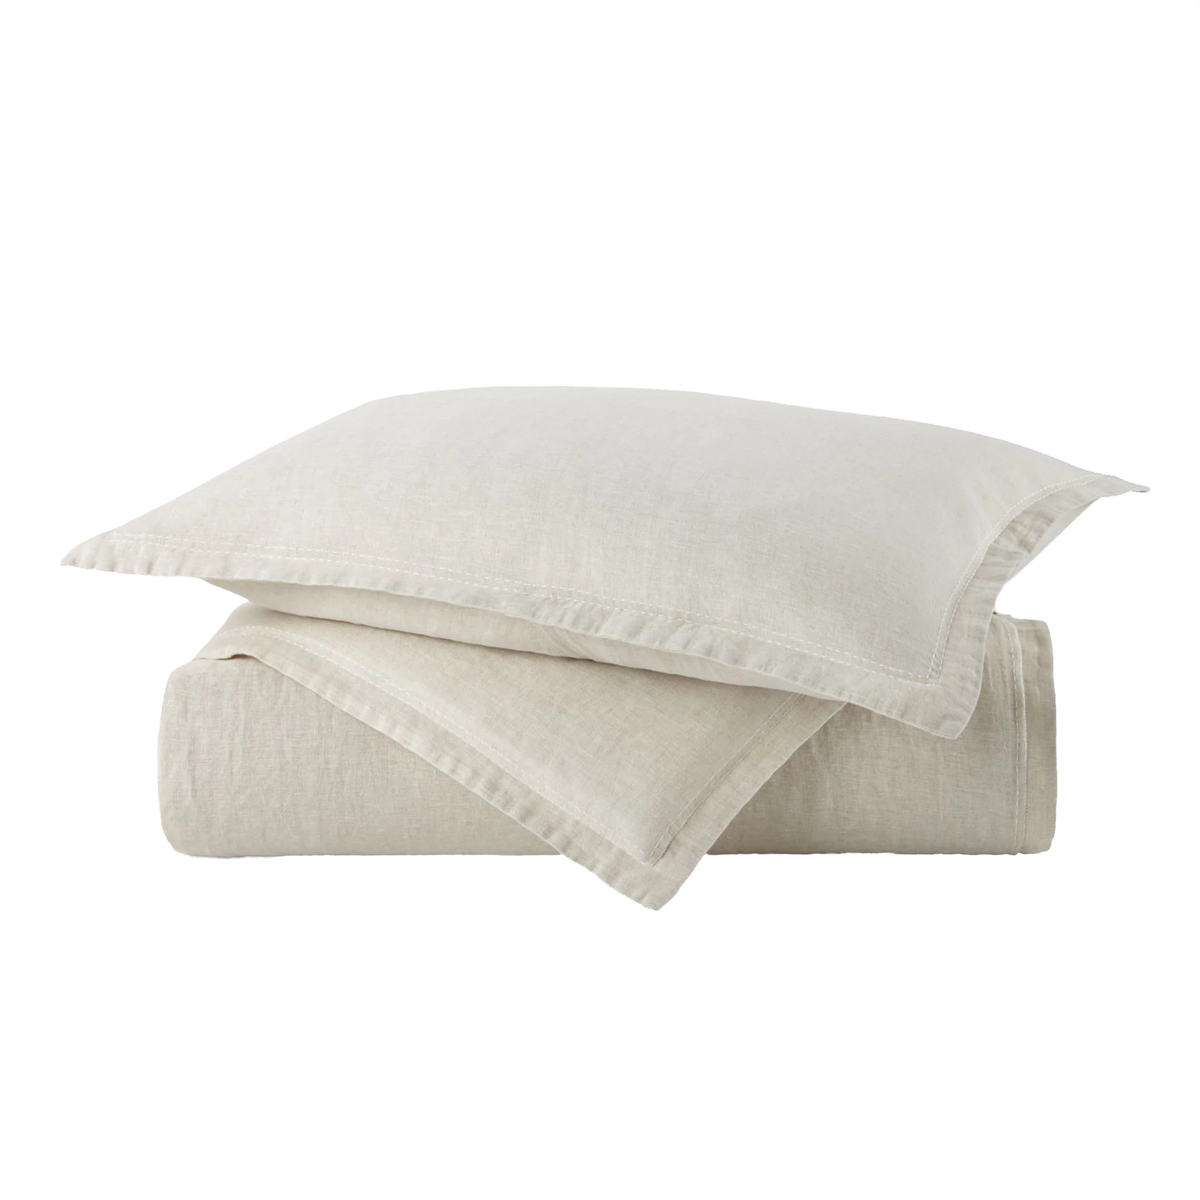 Stack of Peacock Alley European Washed Linen Bedding in Natural Color